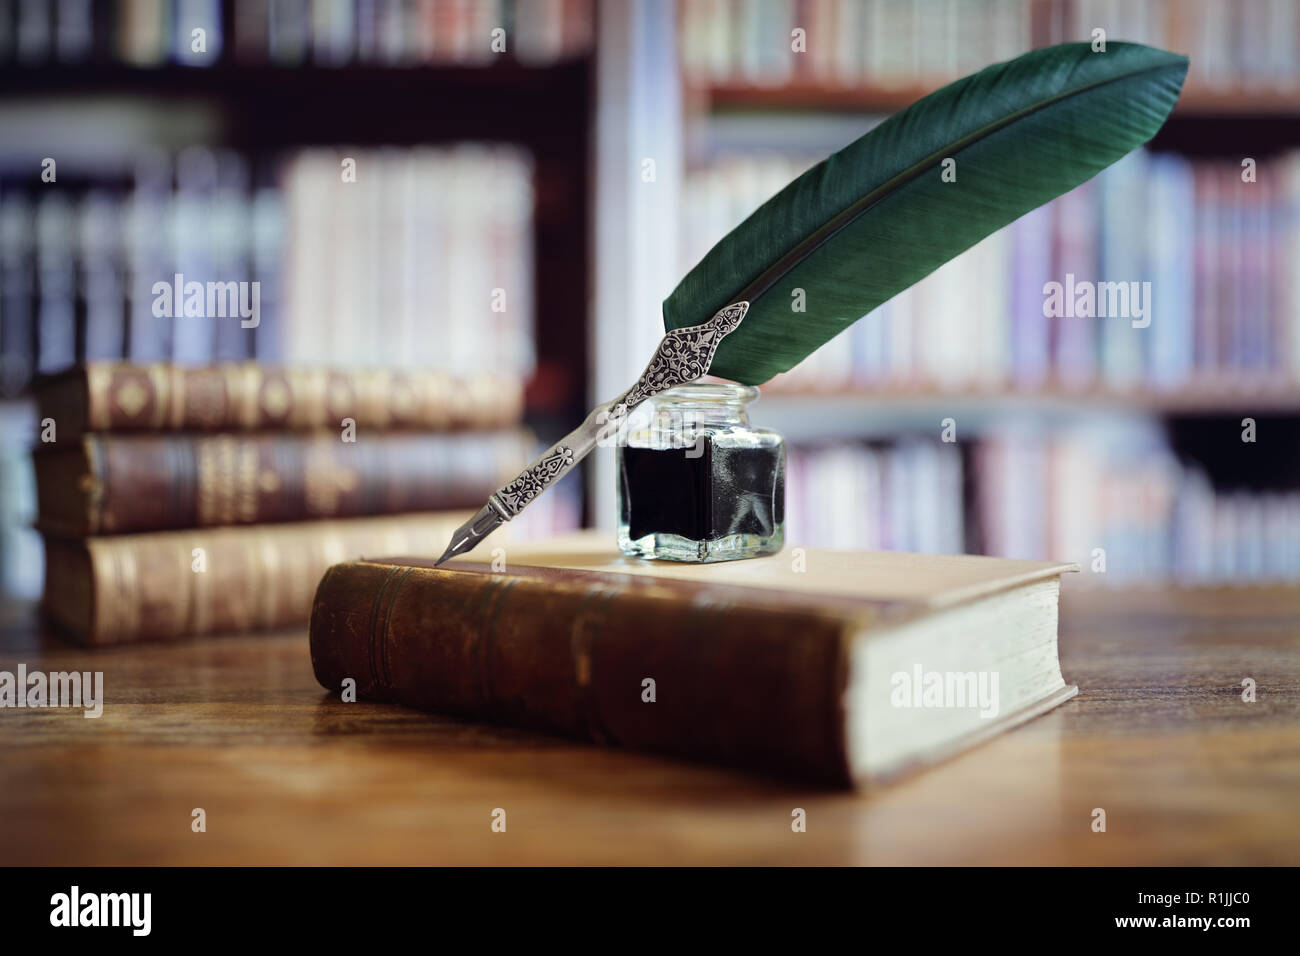 Quill pen and ink well resting on an old book in a library concept for literature, writing, author and history Stock Photo